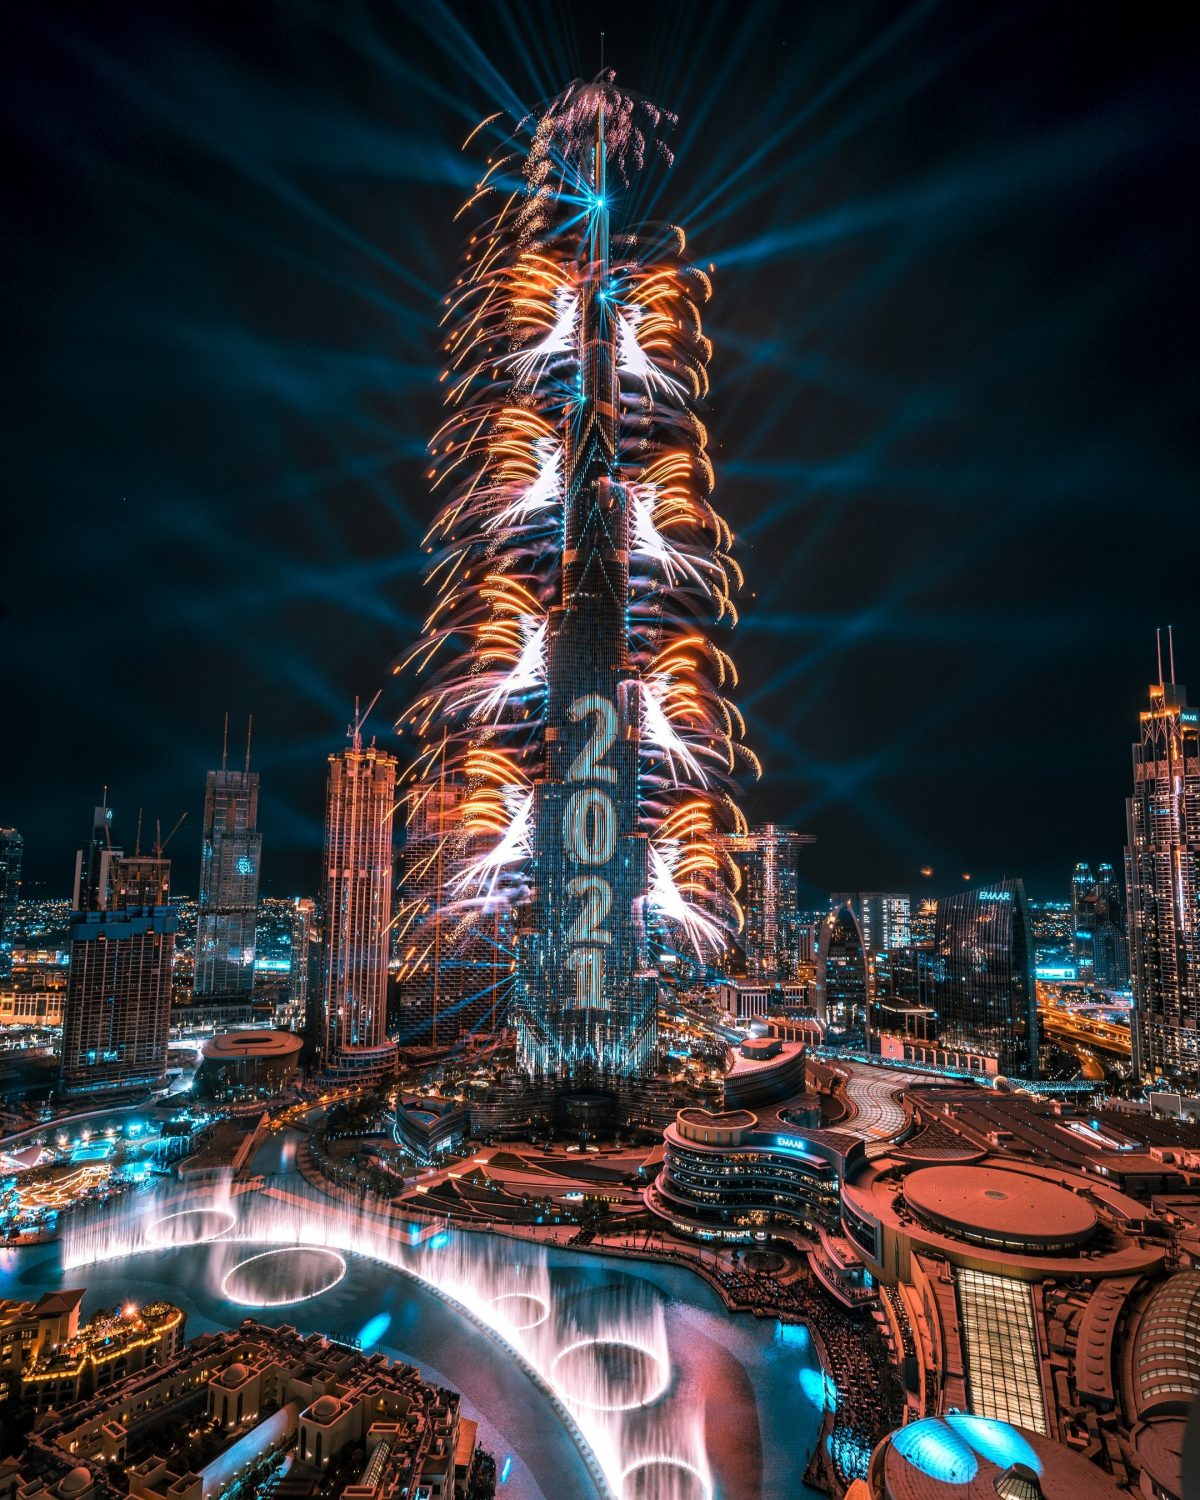 Burj Khalifa and Downtown Dubai bring in 2021 with a spectacular New Year’s Eve celebration